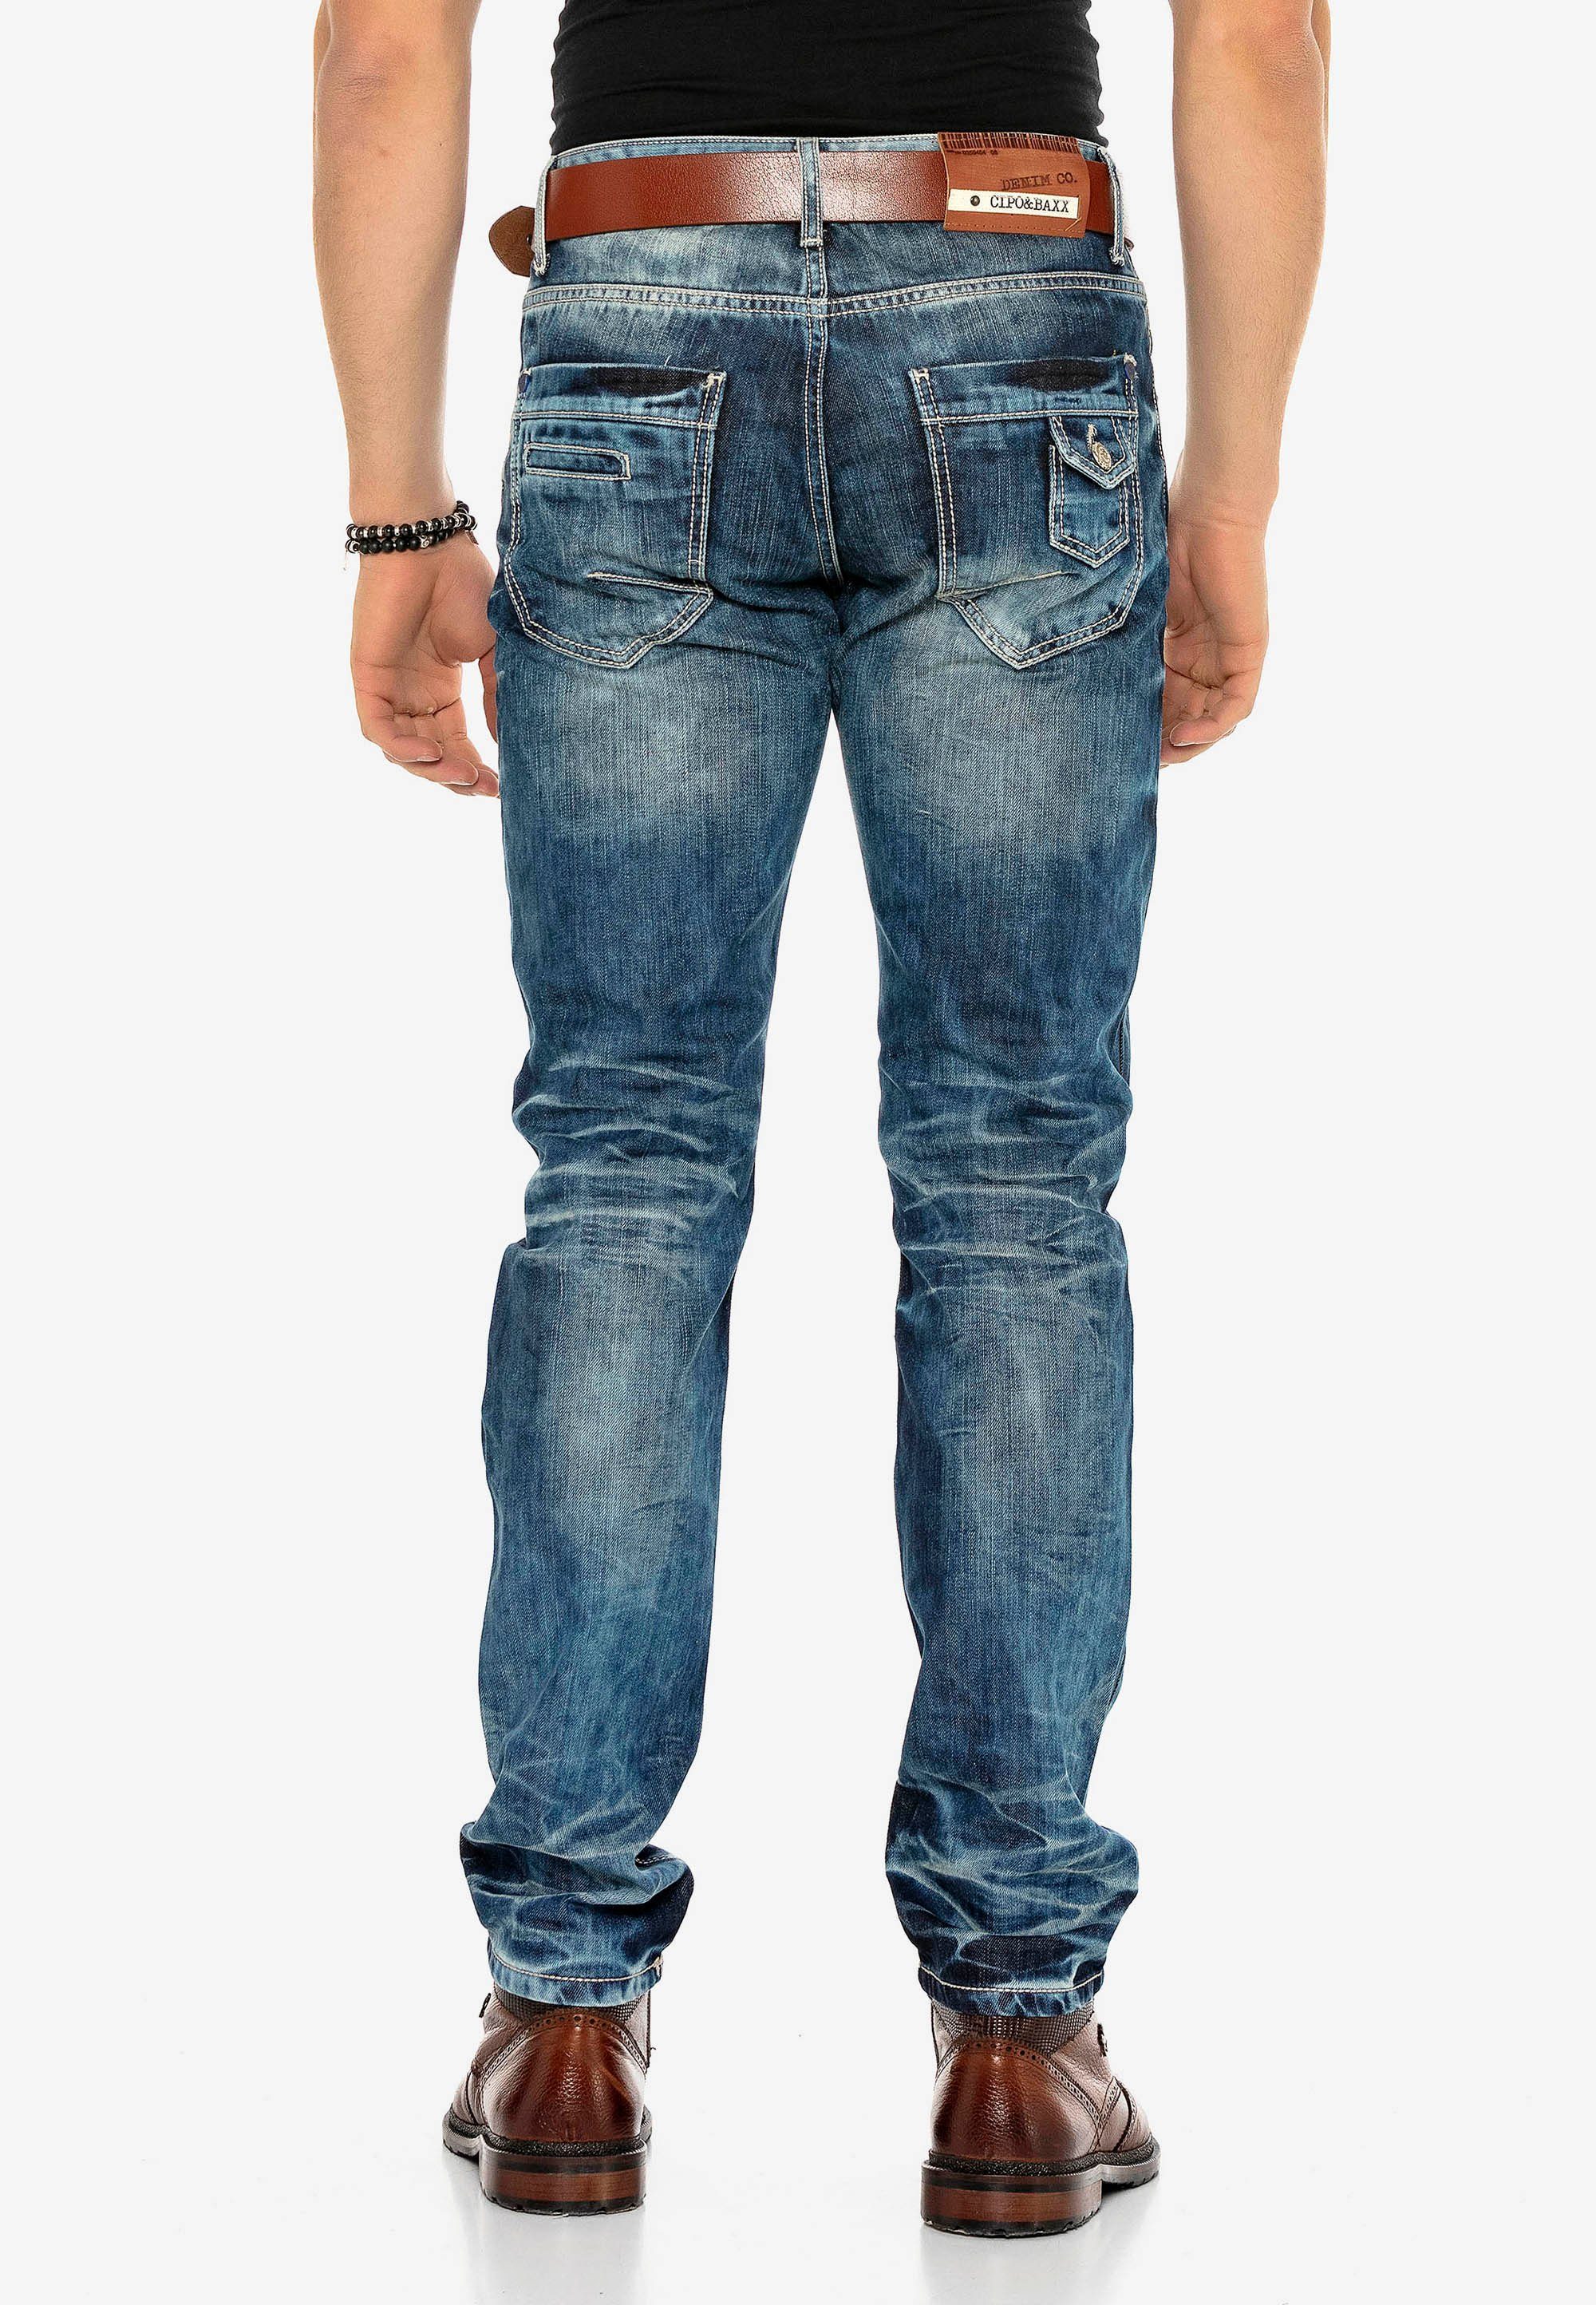 Regular Jeans Baxx in Bequeme & Fit Cipo